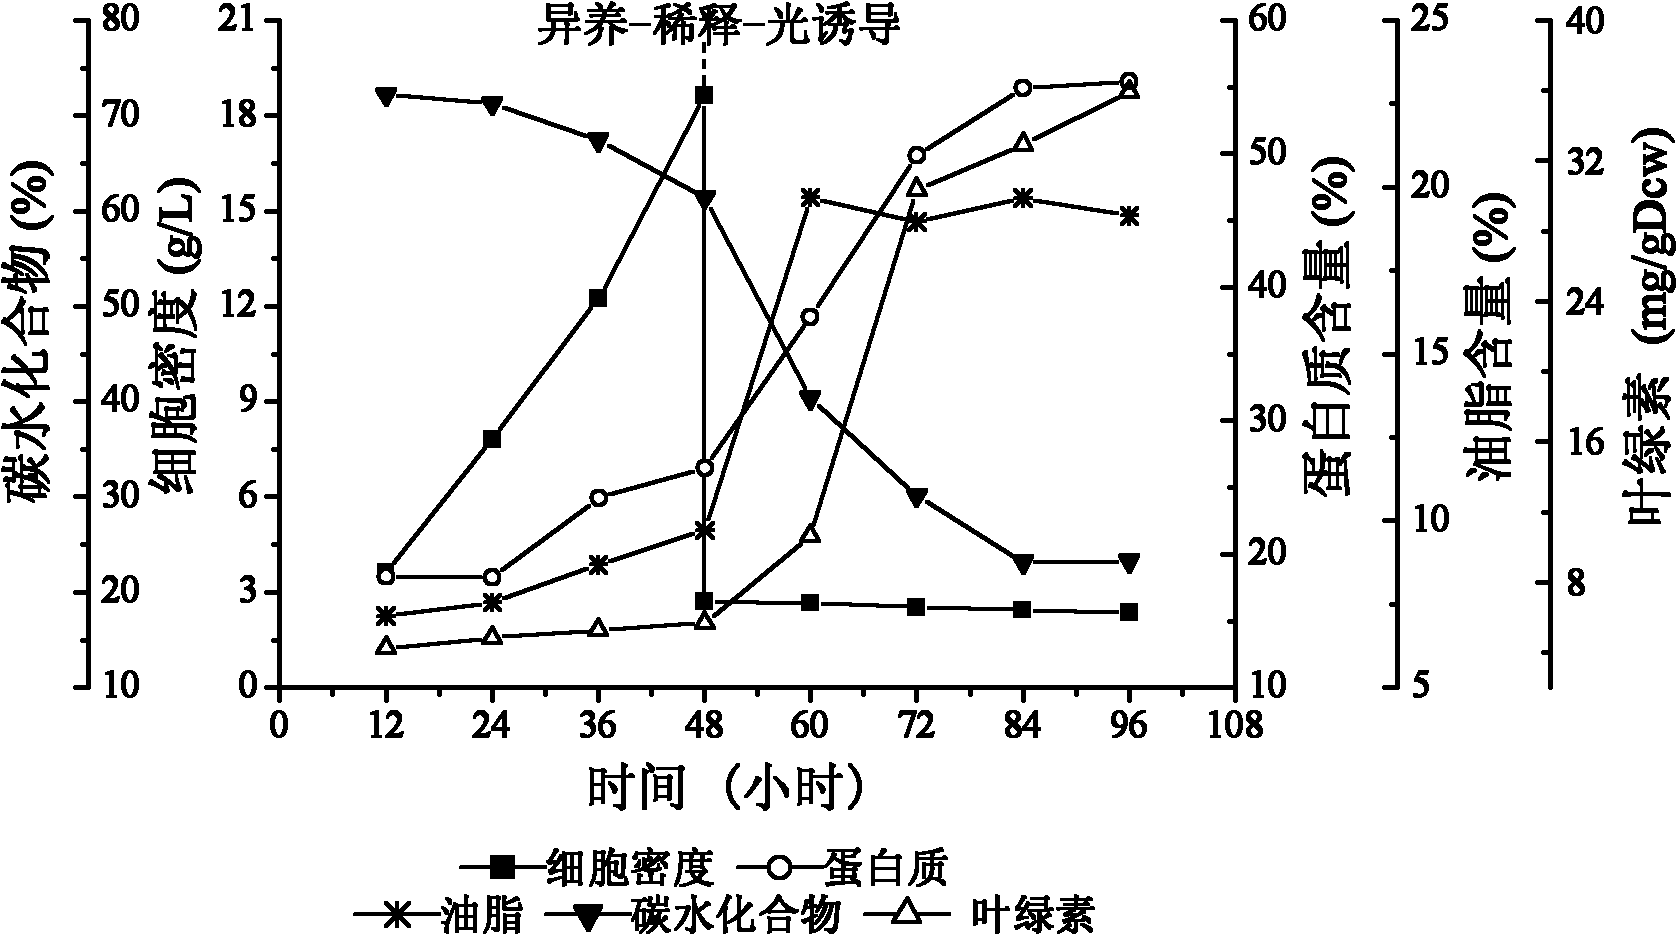 Method for rapidly accumulating micro-algae intracellular grease